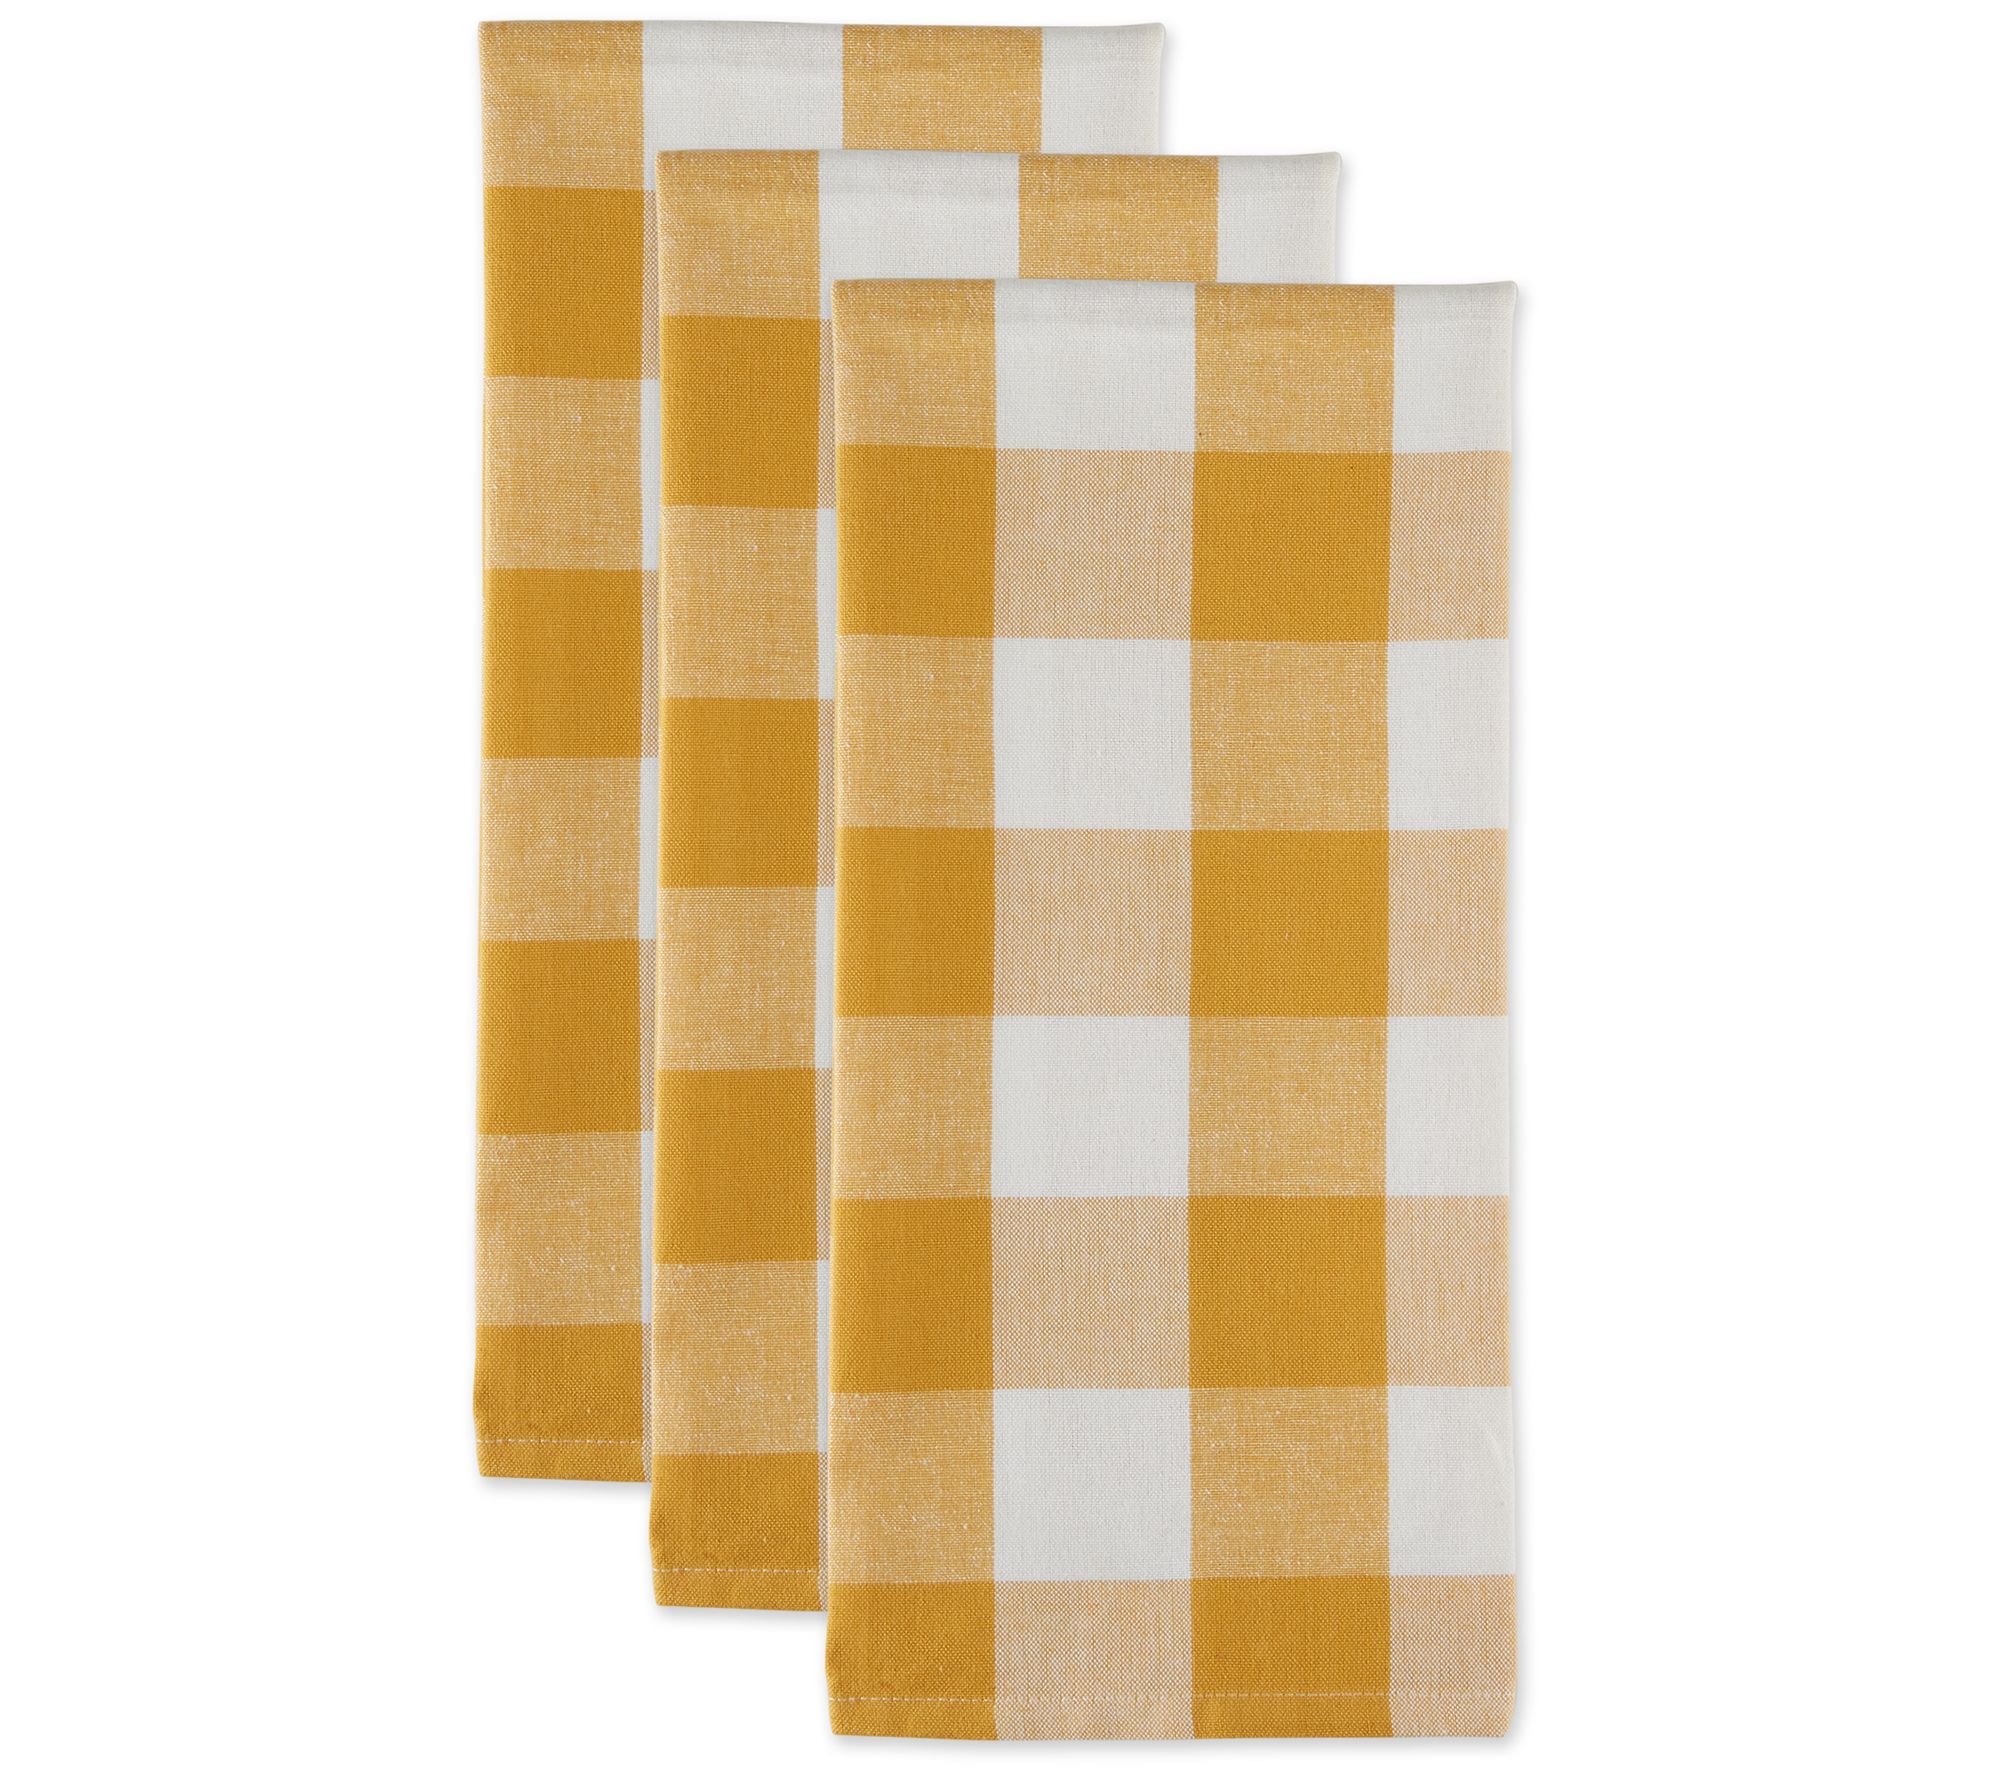 Design Imports 3-pack Buffalo Check Kitchen Towels